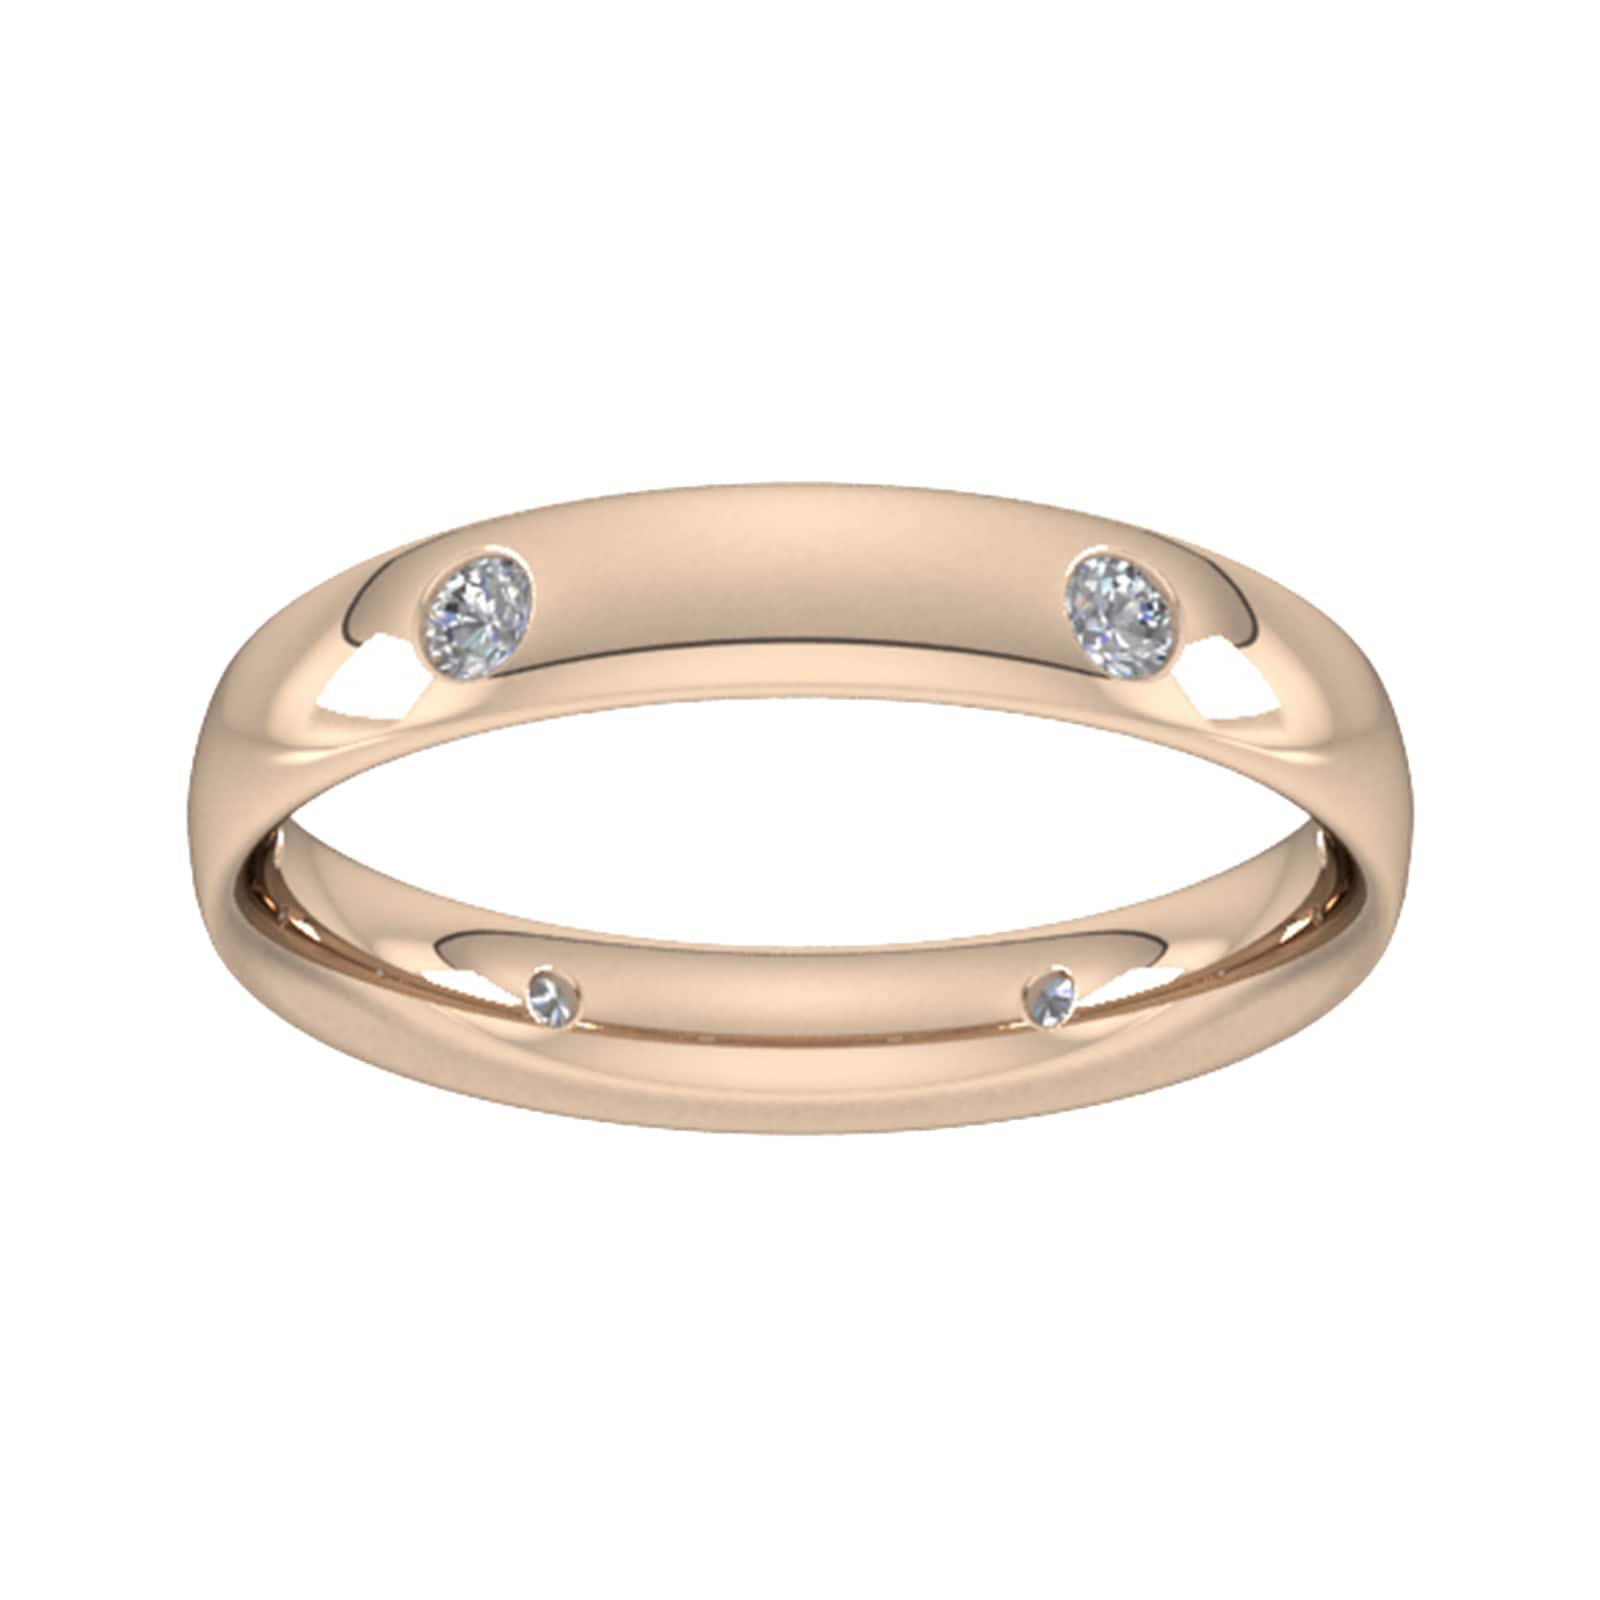 0.21 Carat Total Weight 6 Stone Brilliant Cut Rub Over Diamond Set Wedding Ring In 18 Carat Rose Gold - Ring Size R